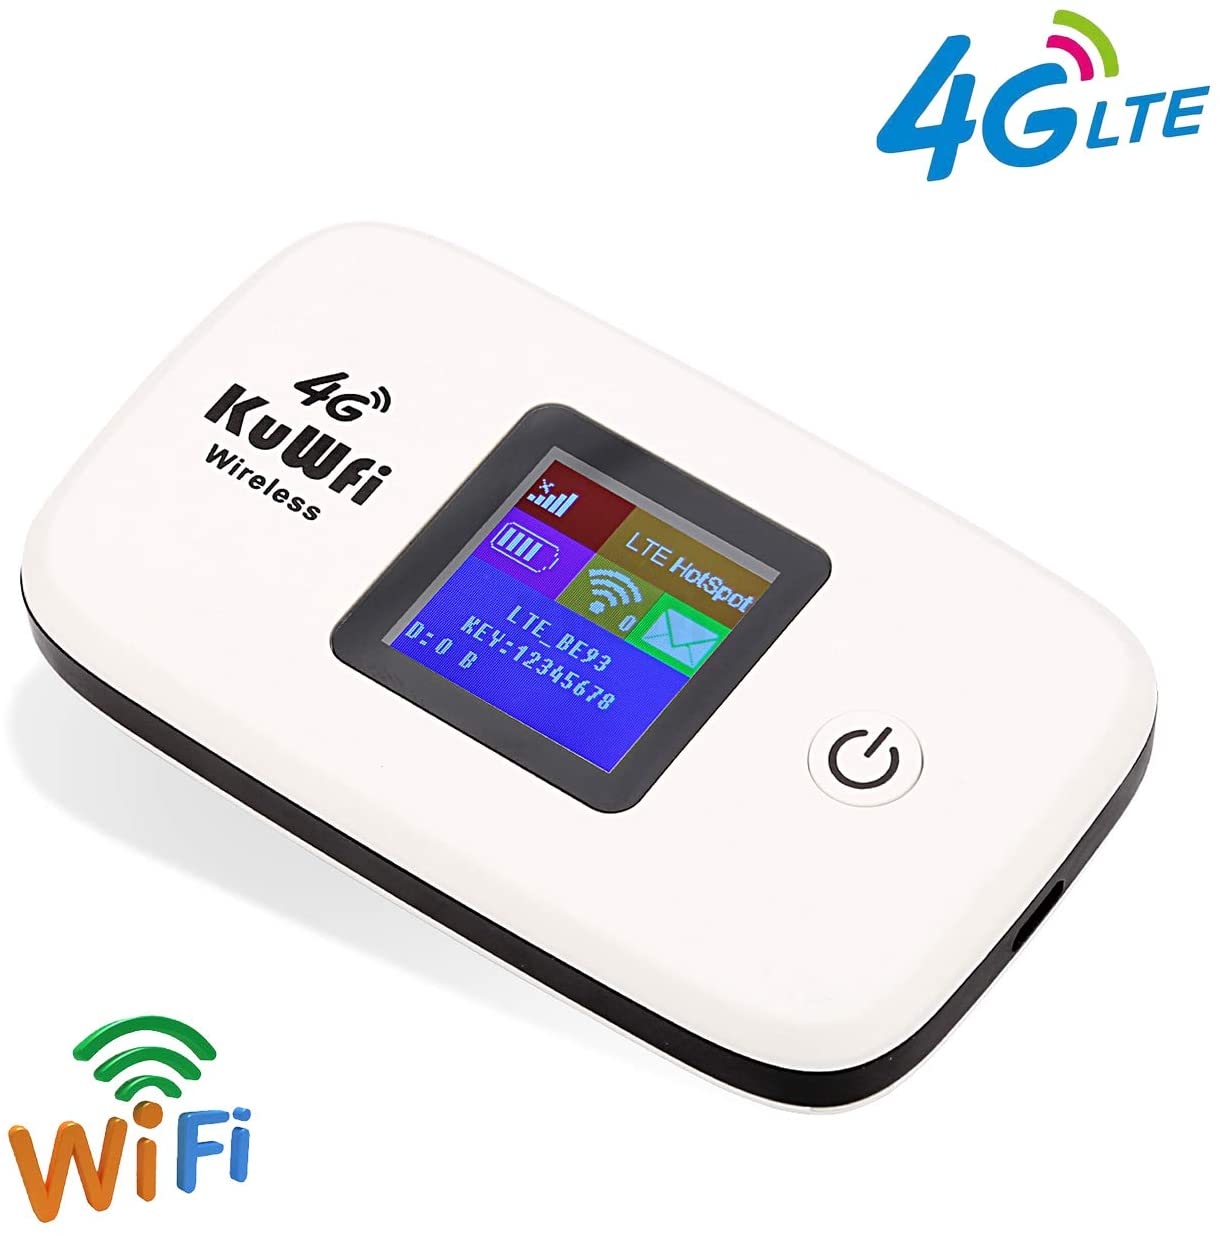 KuWFi 4G LTE Mobile WiFi Hotspot Support10users Router SIM Card